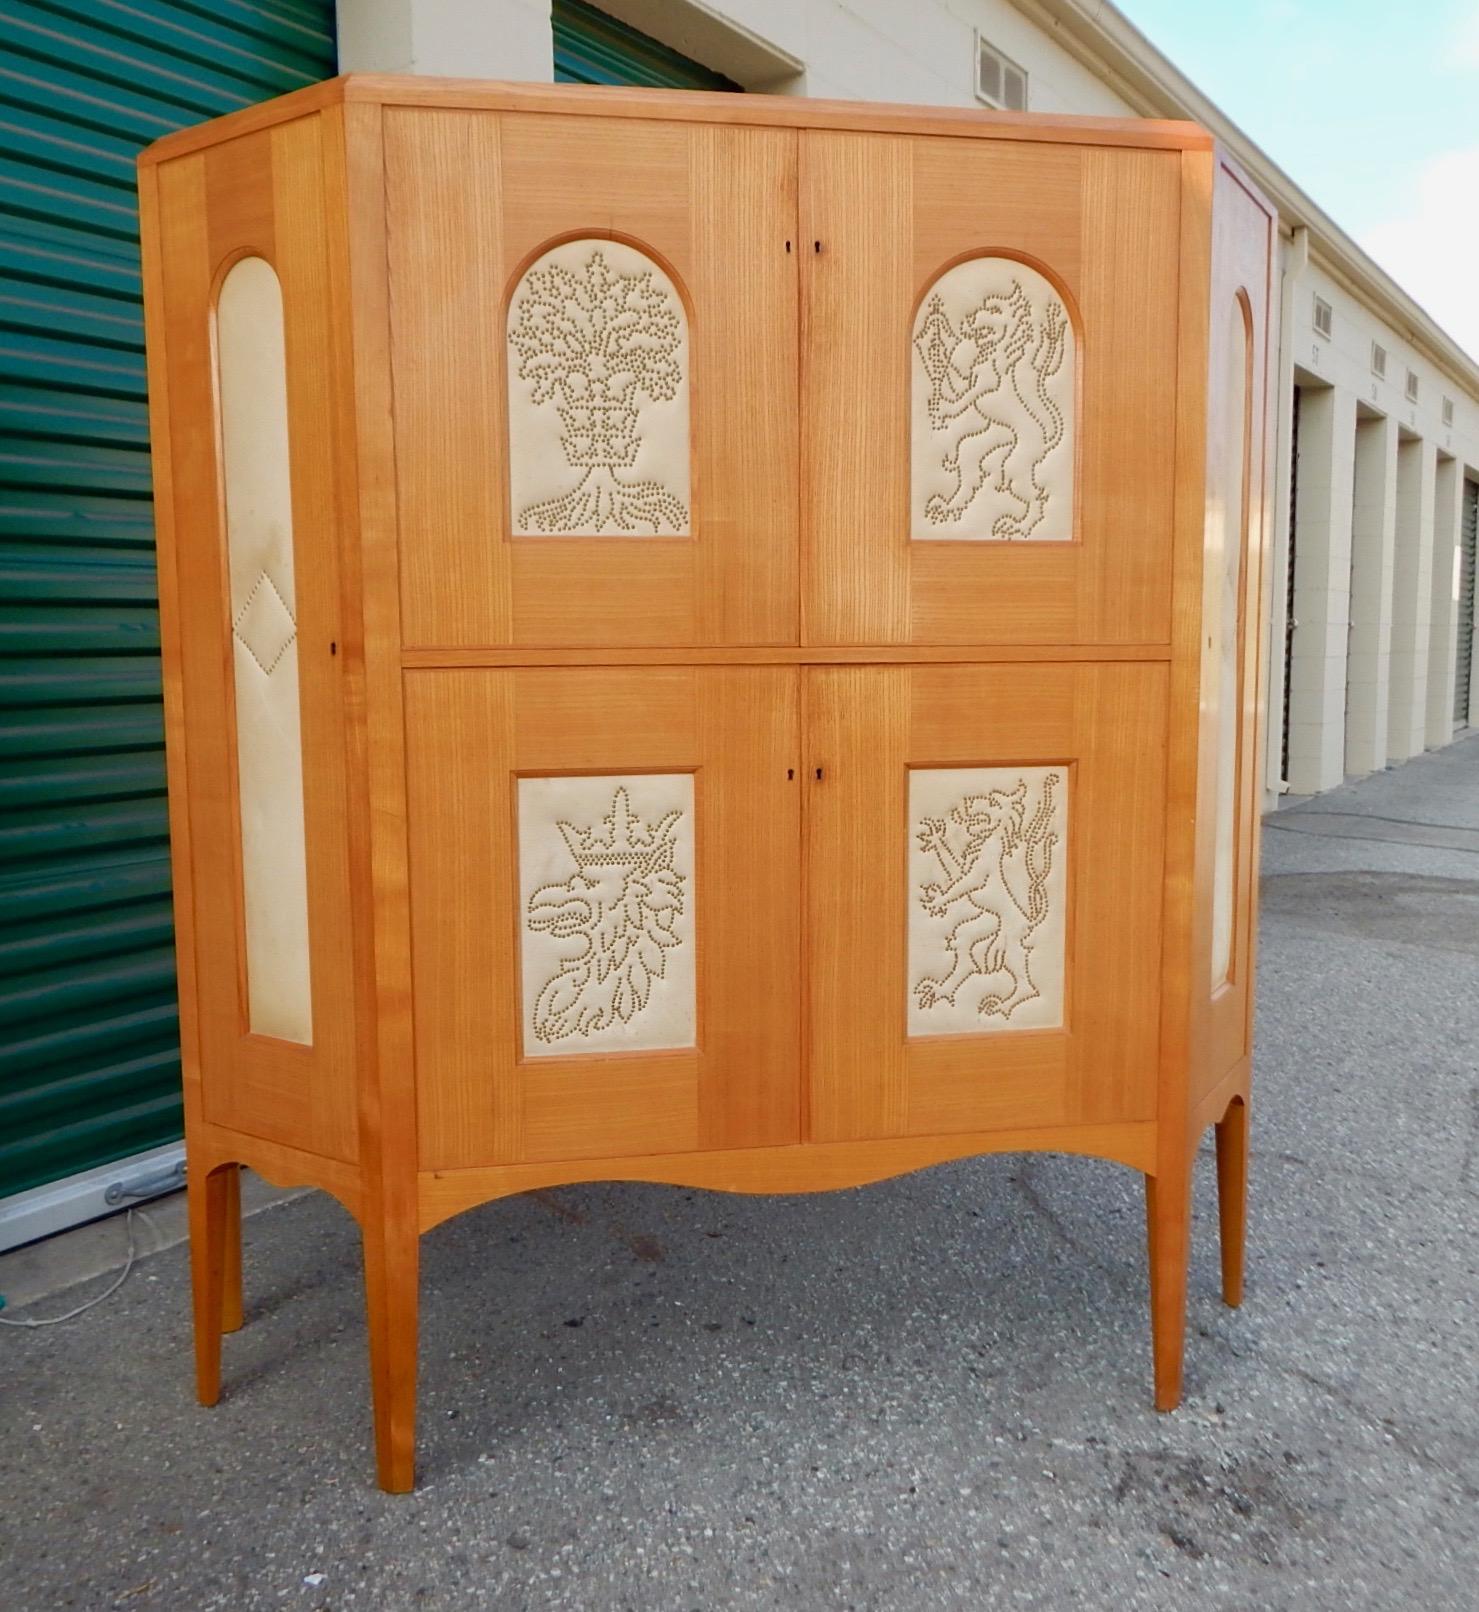 Art deco era storage cabinet by Otto Schulz for Boet it Gothenburg, Sweden circa 1930. Crafted in golden elm wood. The four nail head friezes on the doors are Schulz' trademark and represent the coats of arms of the Swedish states of Blekinge,